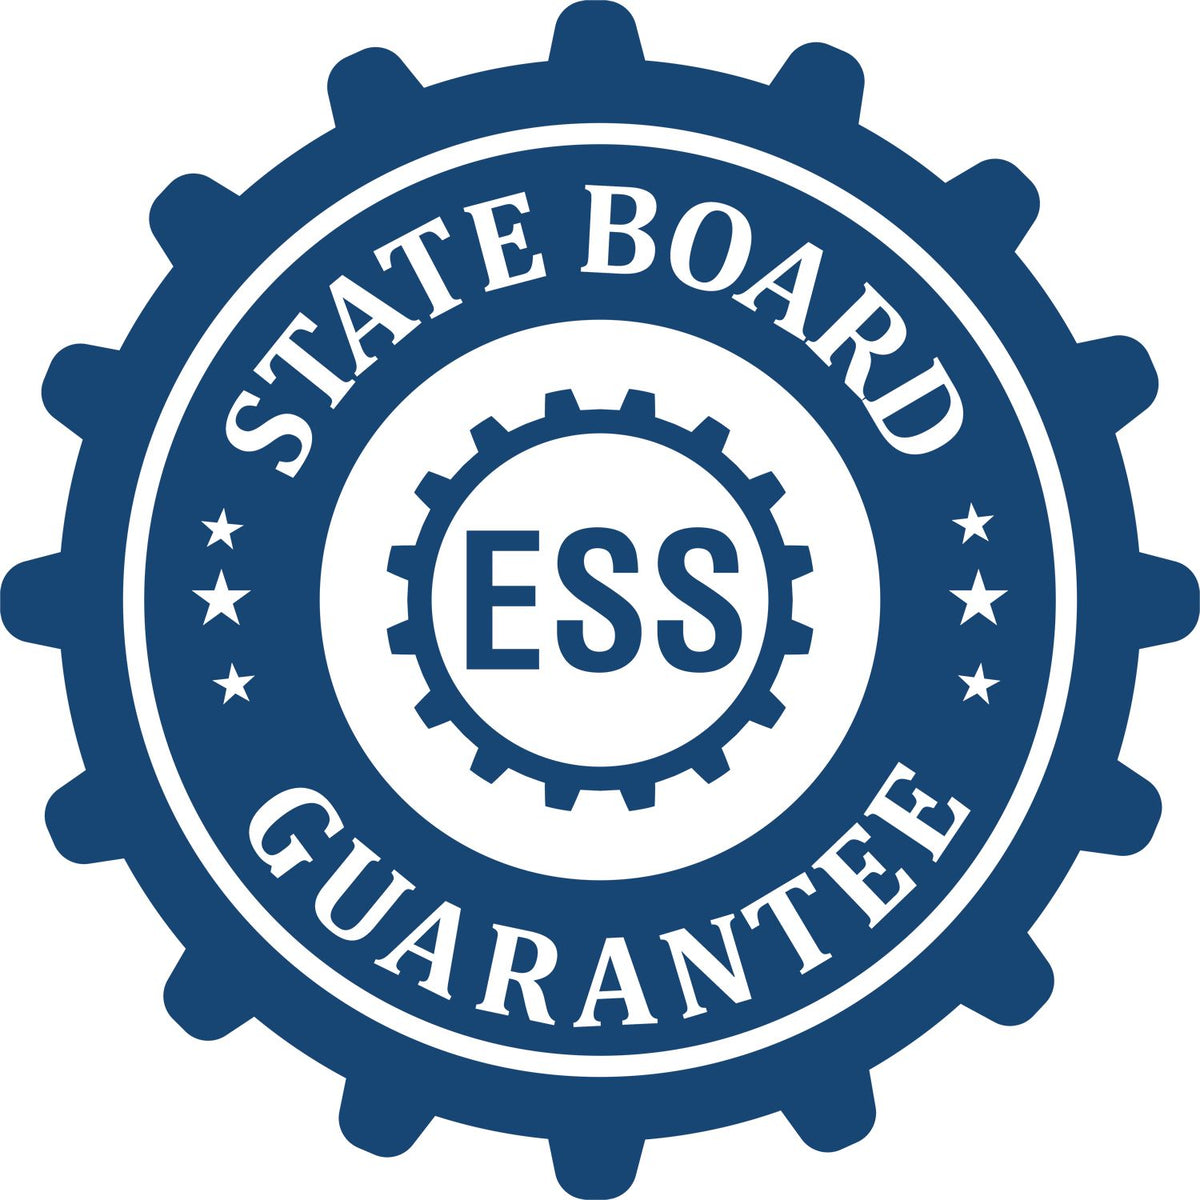 An emblem in a gear shape illustrating a state board guarantee for the South Dakota Geologist Desk Seal